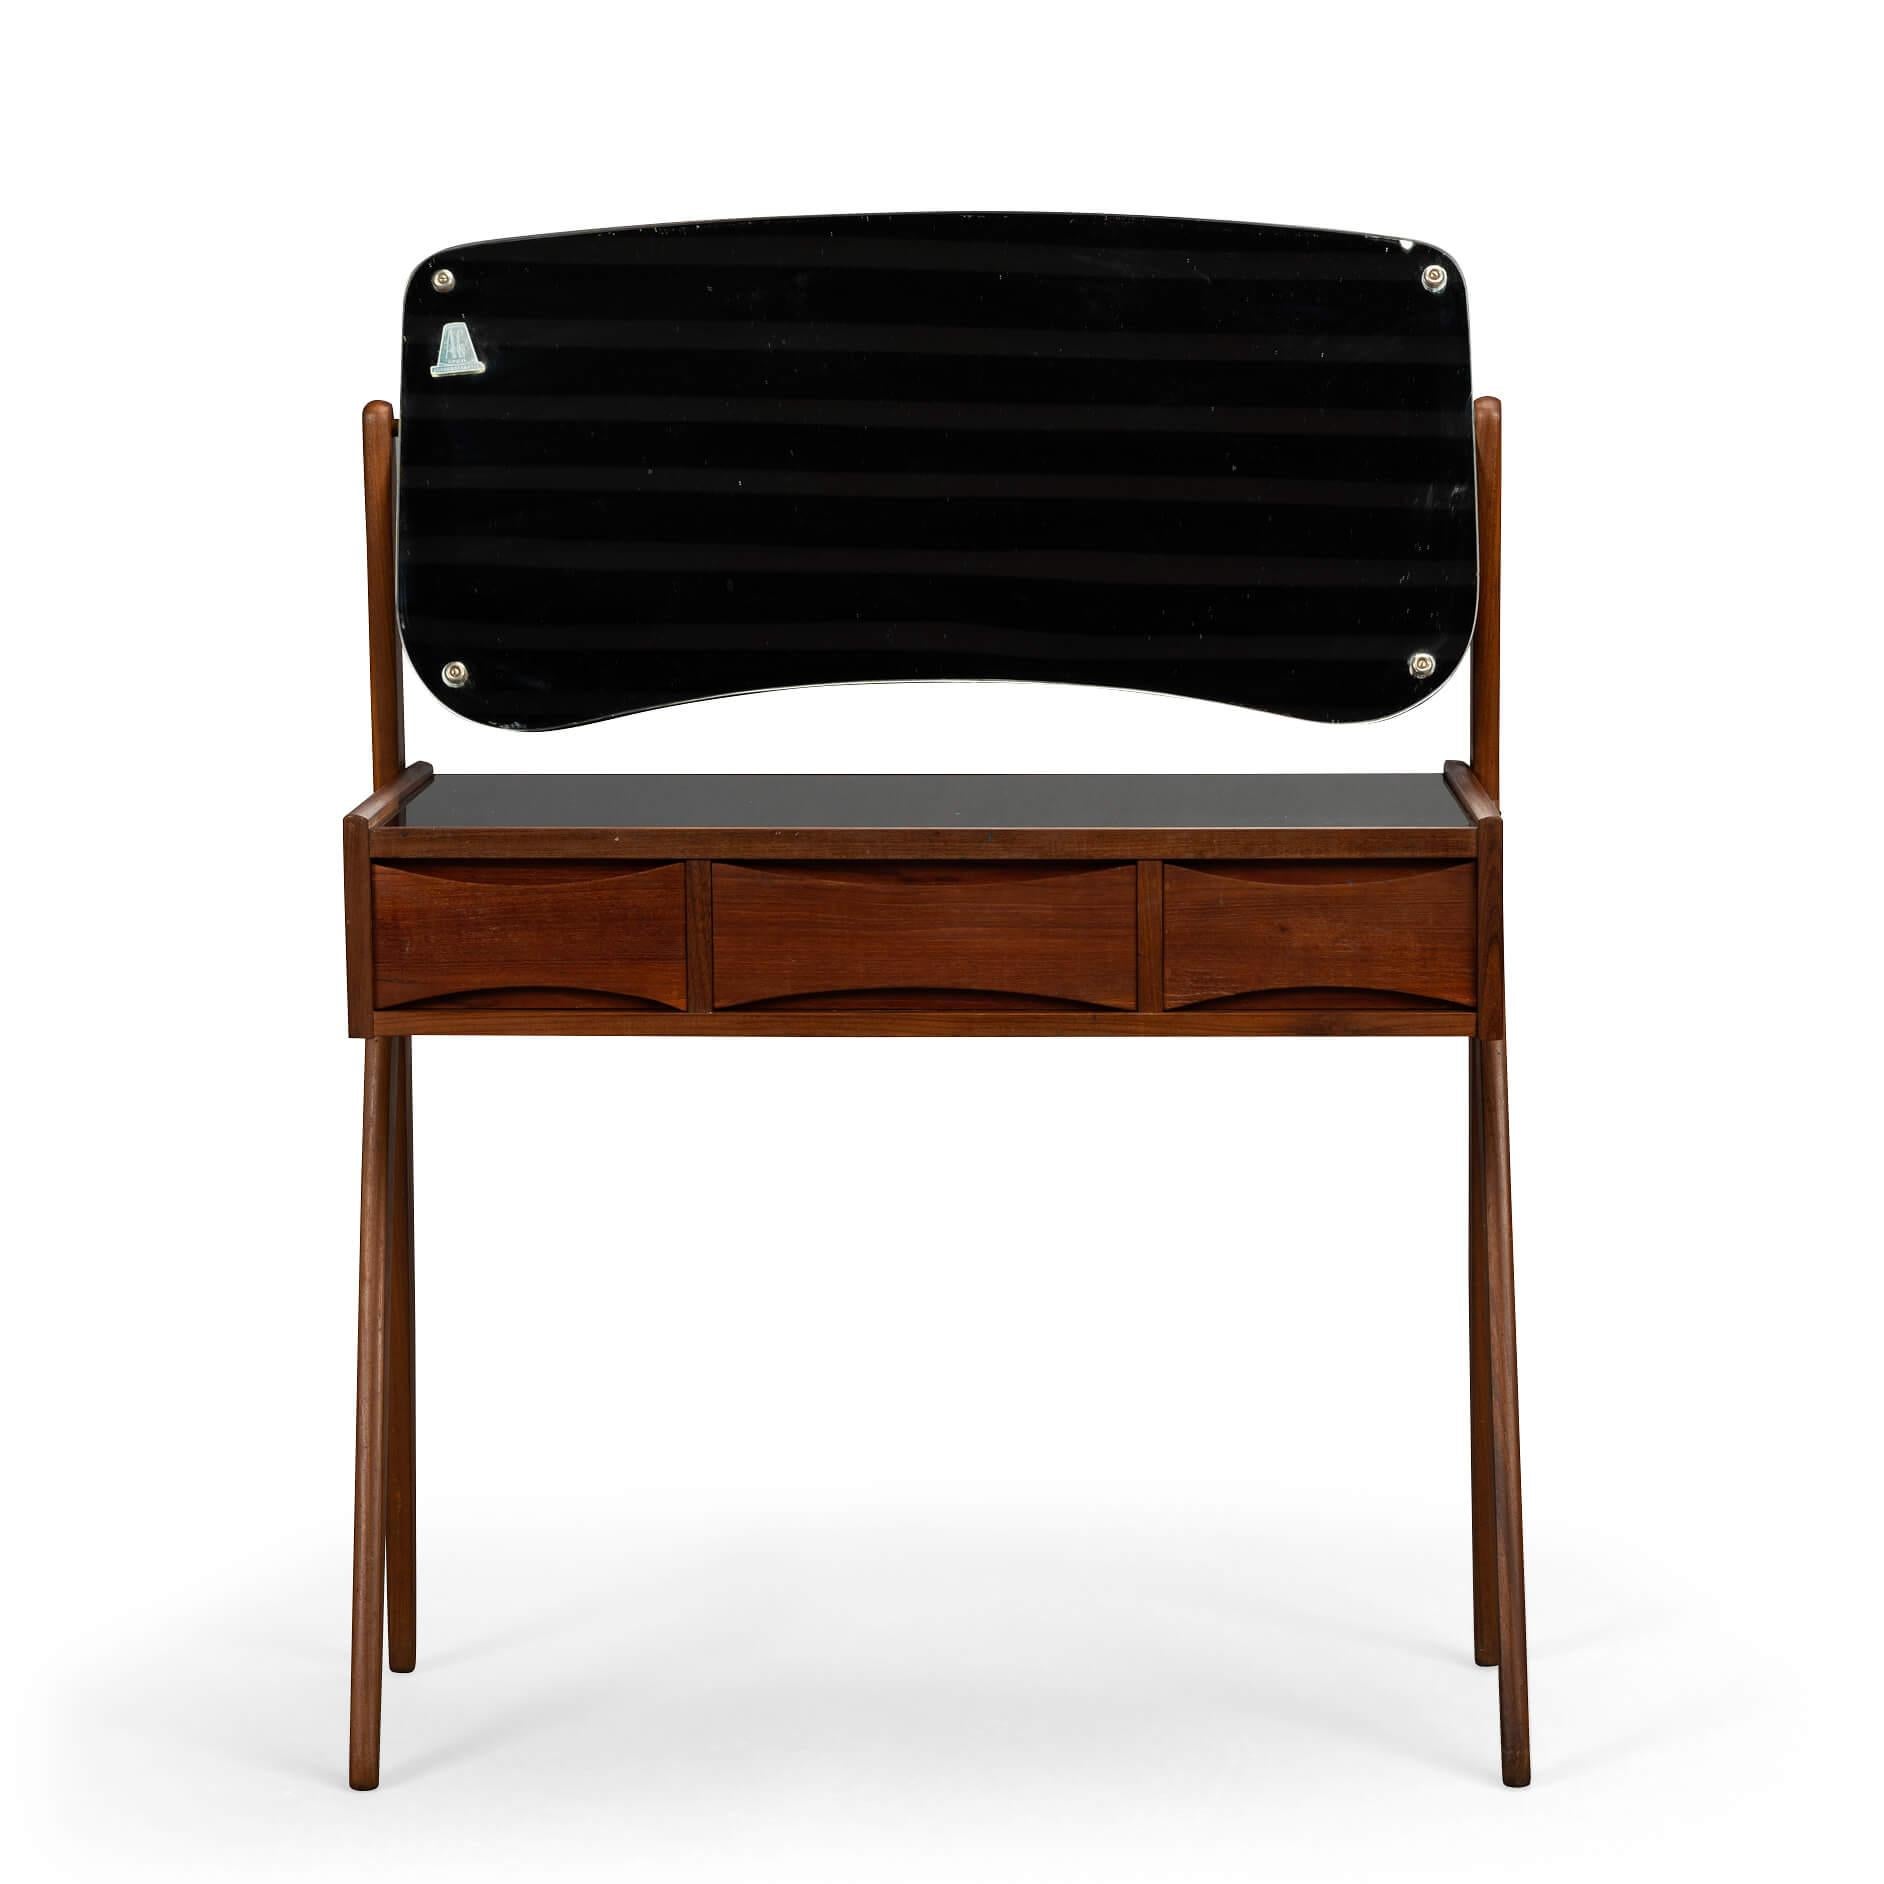 Introducing the AG Spejl Kobberbeskyttet Mid-Century Modern teak Danish Design Dressing table, a stunning piece that combines timeless elegance and functionality. Crafted from high-quality teak wood, this dressing table showcases the iconic clean